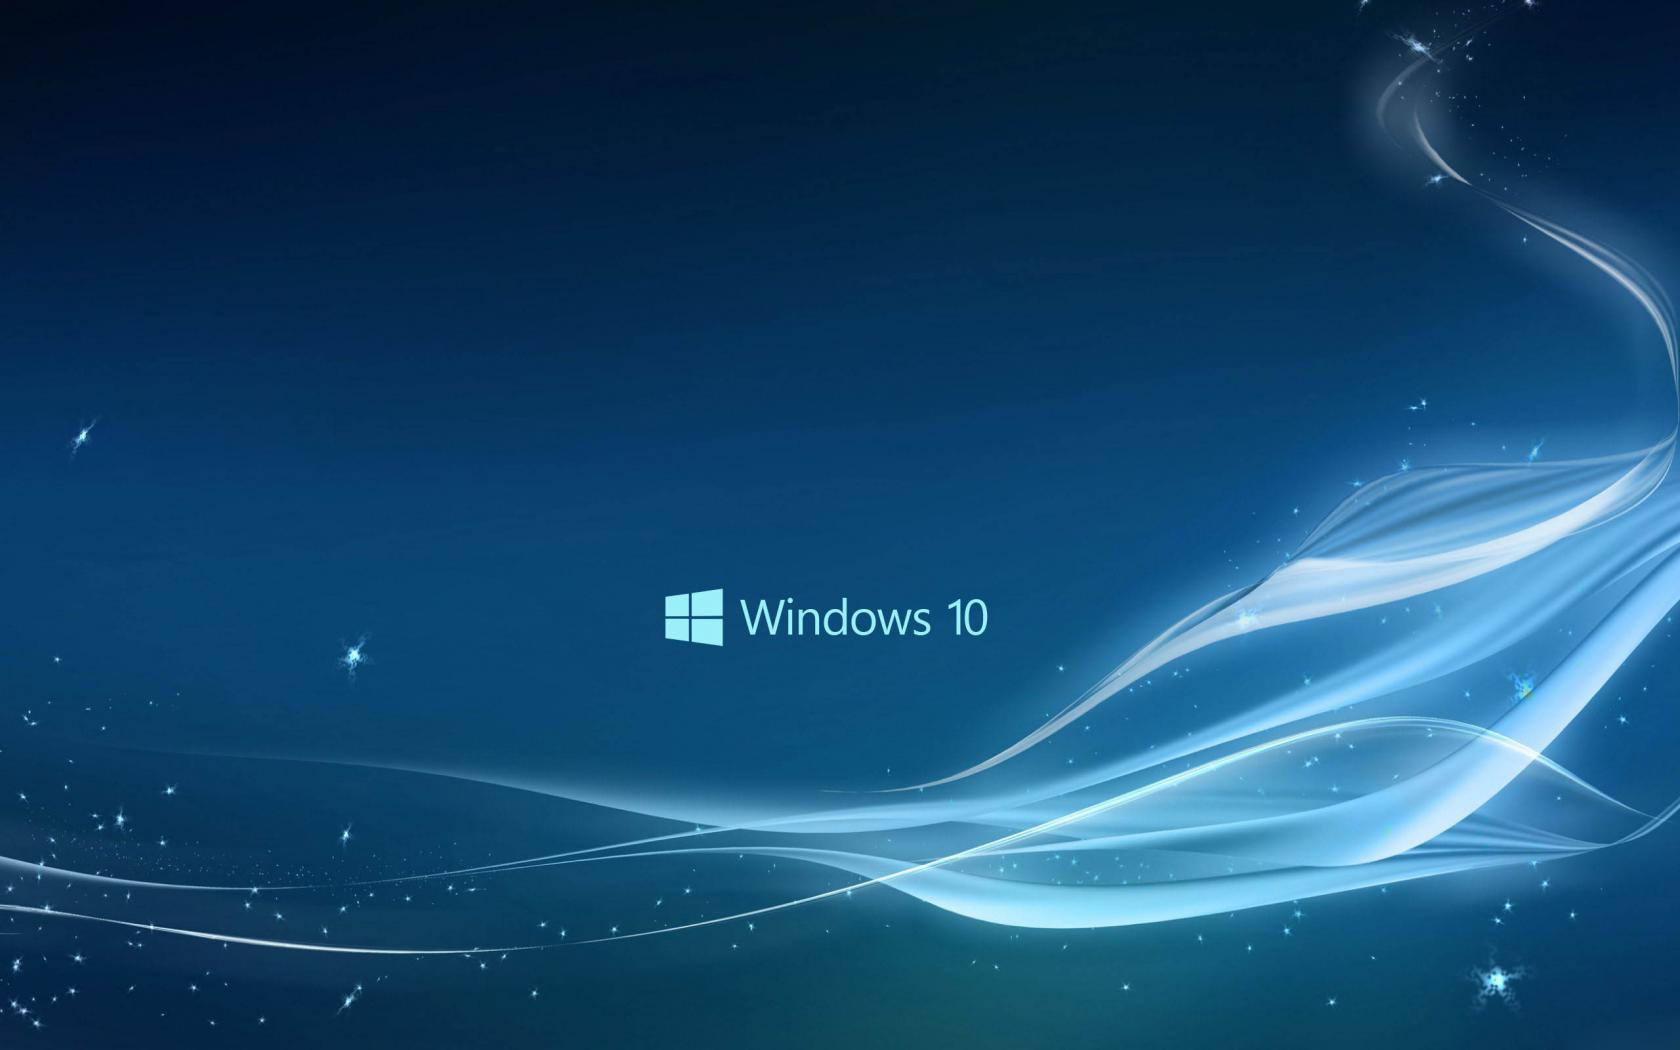 Windows Wallpaper In Blue Abstract Stars And Waves HD